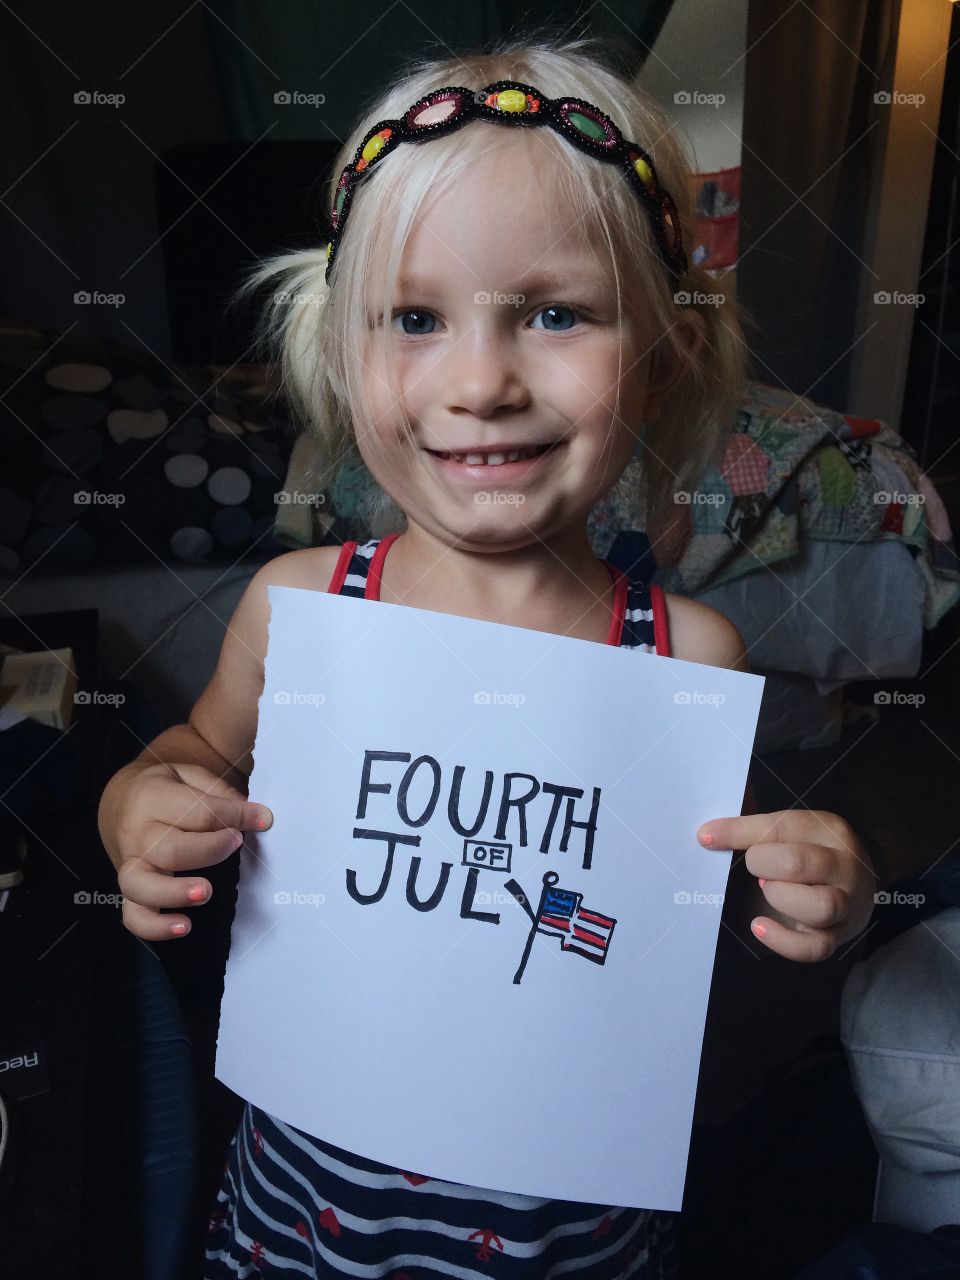 Girl showing fourth of july text on paper